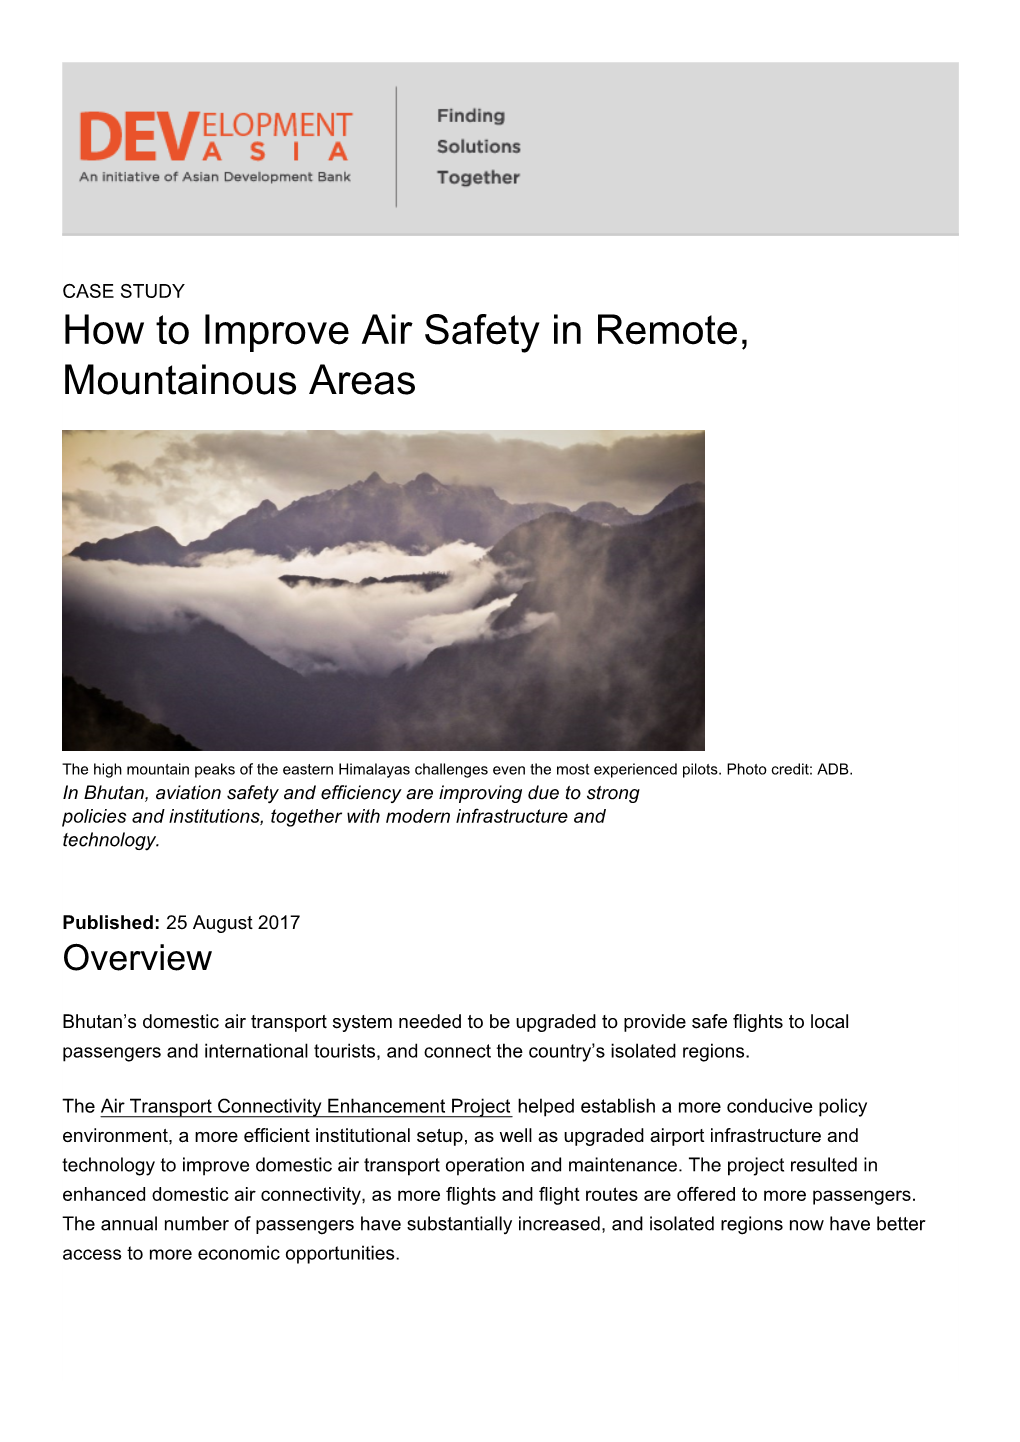 How to Improve Air Safety in Remote, Mountainous Areas